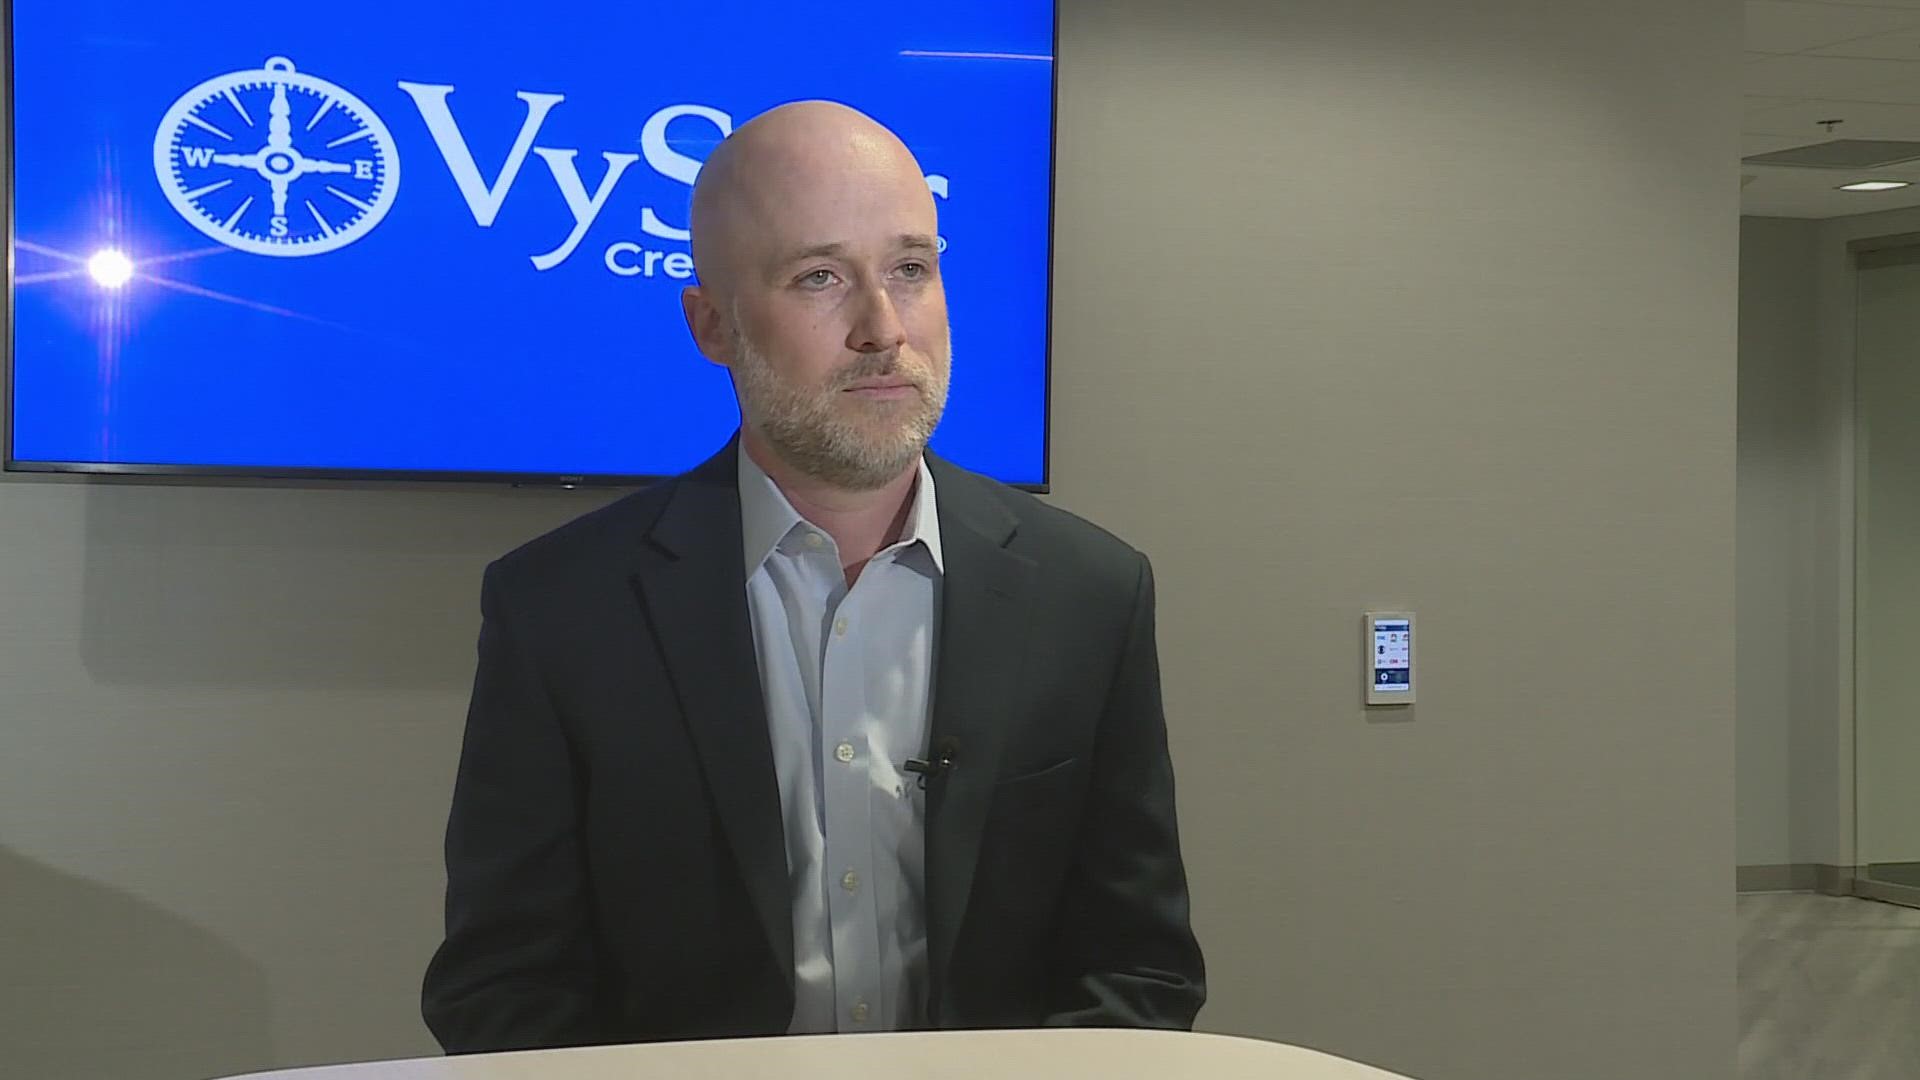 VyStar sat down with First Coast News to discuss the credit union's website and app outage. After seven days, the company has no timeline for a fix.